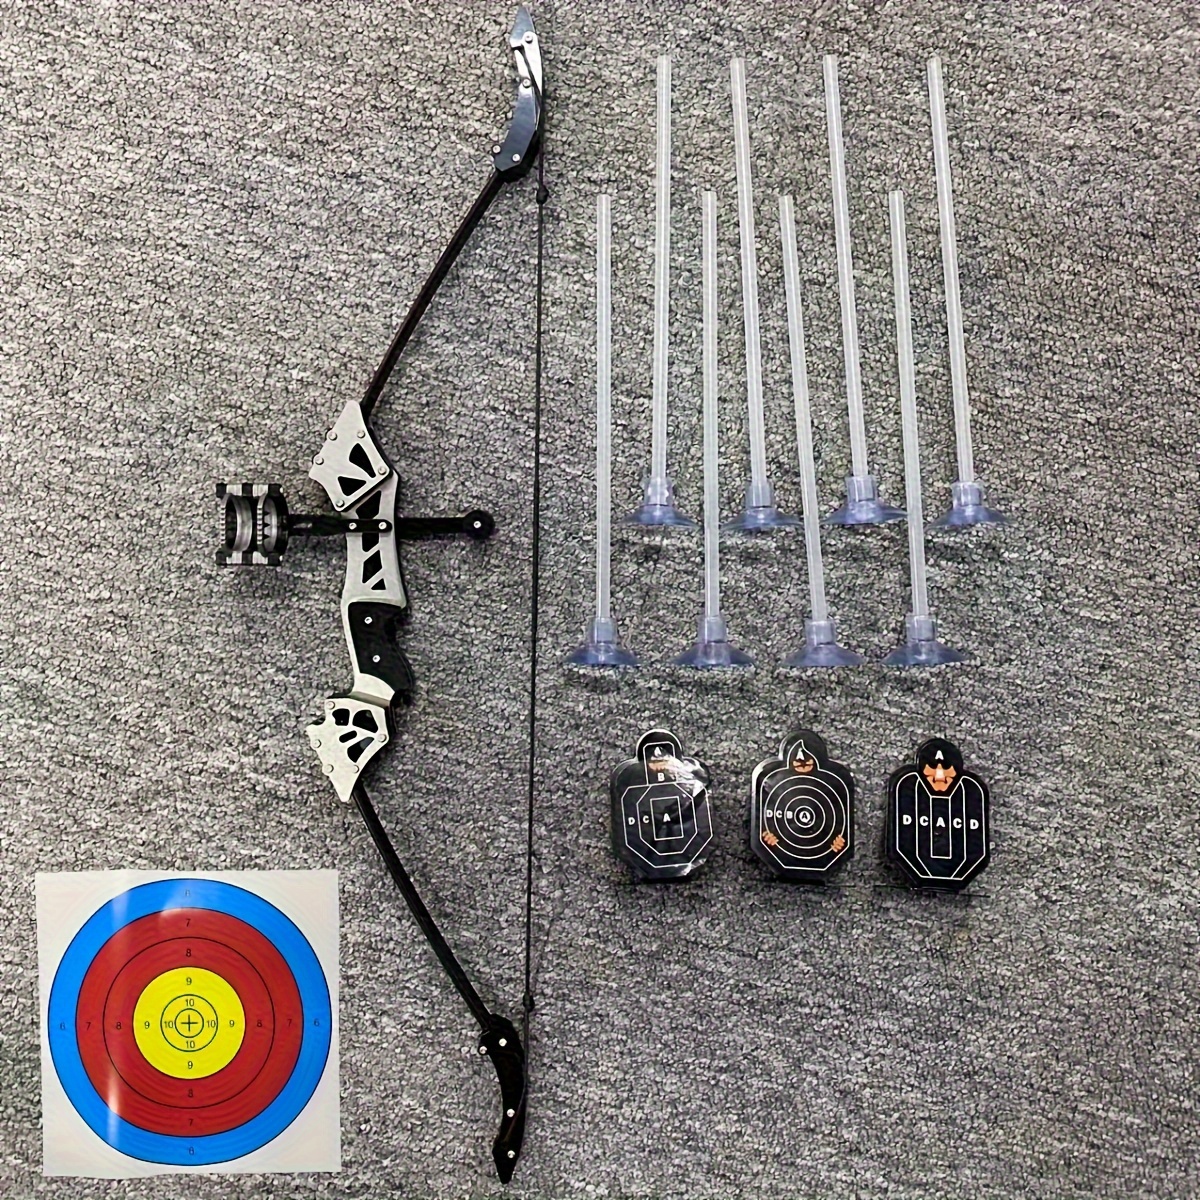  Bow Fishing Reel with Bowfishing Arrows Set Archery Bow  Fishing Reel Kit Bowfishing Tool Accessories Bow Fishing Arrows with Safety  Slides for Compound Bow Recurve Bow (Orange) : Sports 